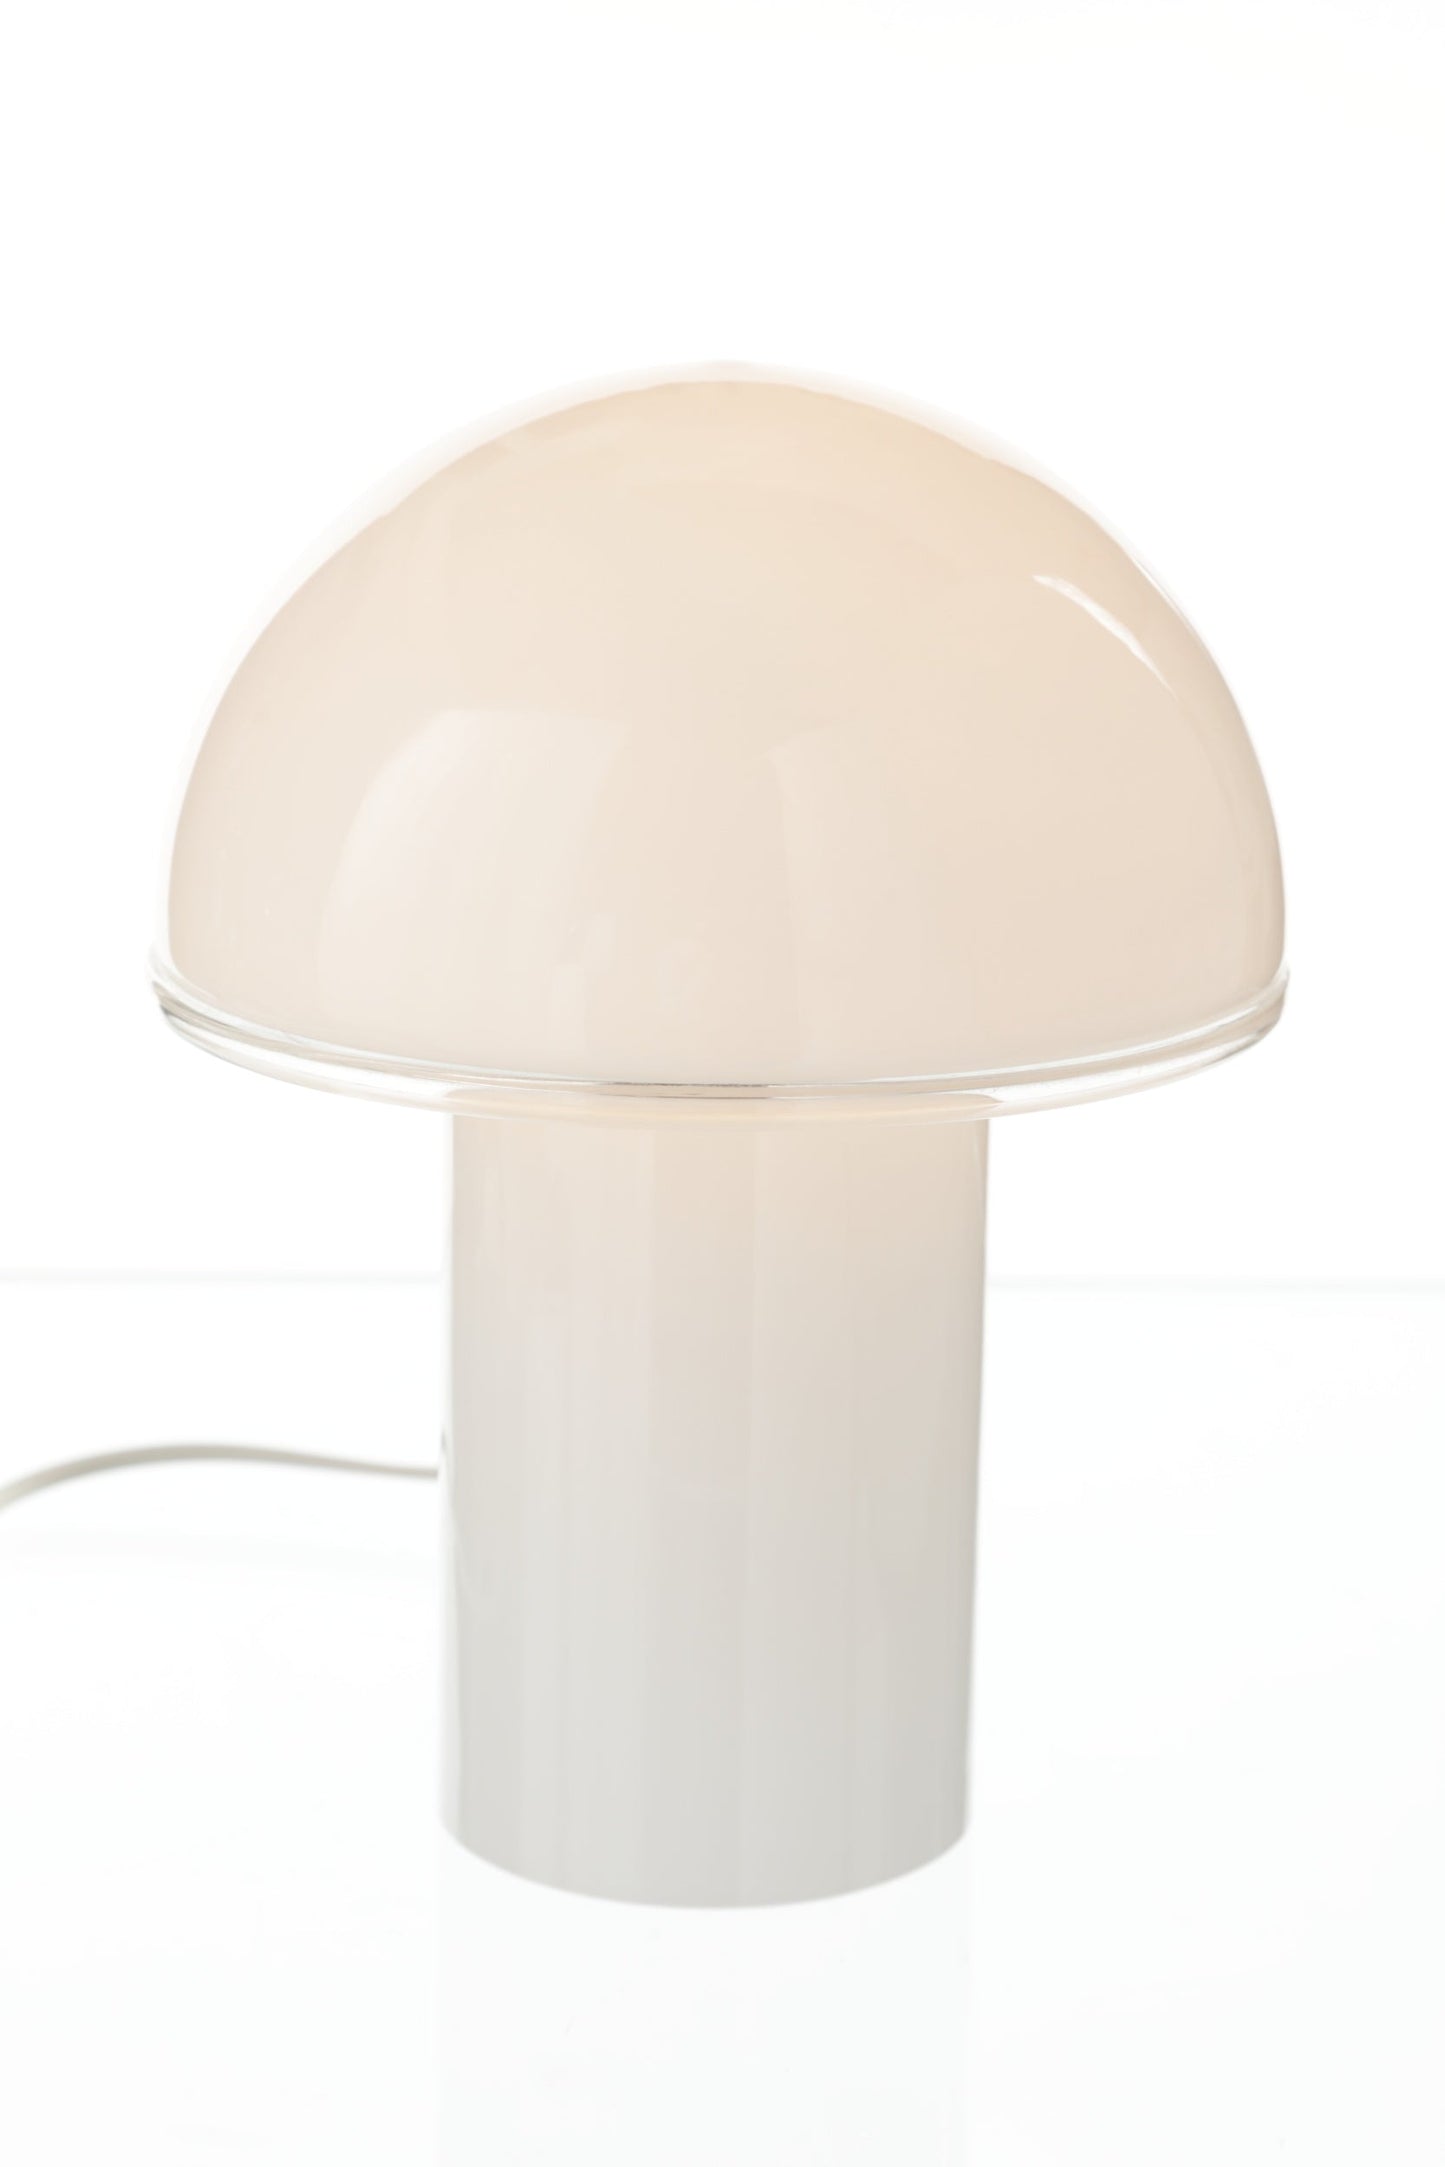 Onfale table lamp Luciano Vistosi for Artemide 1978